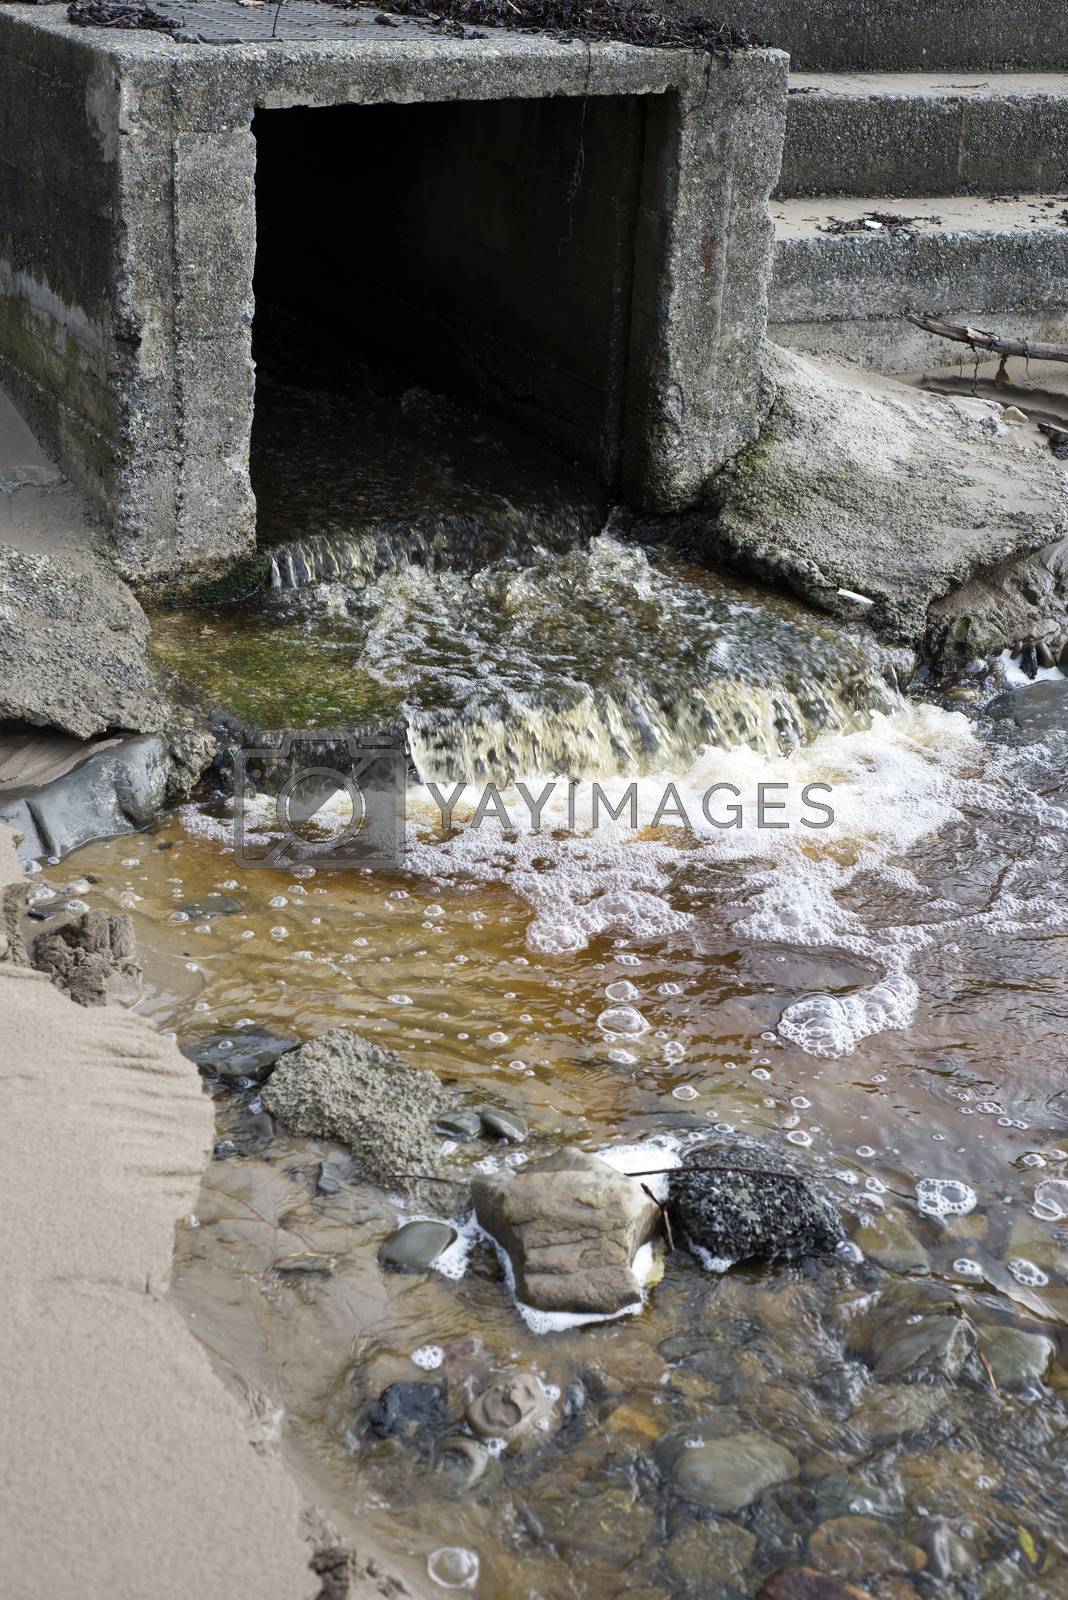 Royalty free image of water flowing from a storm drain by morrbyte